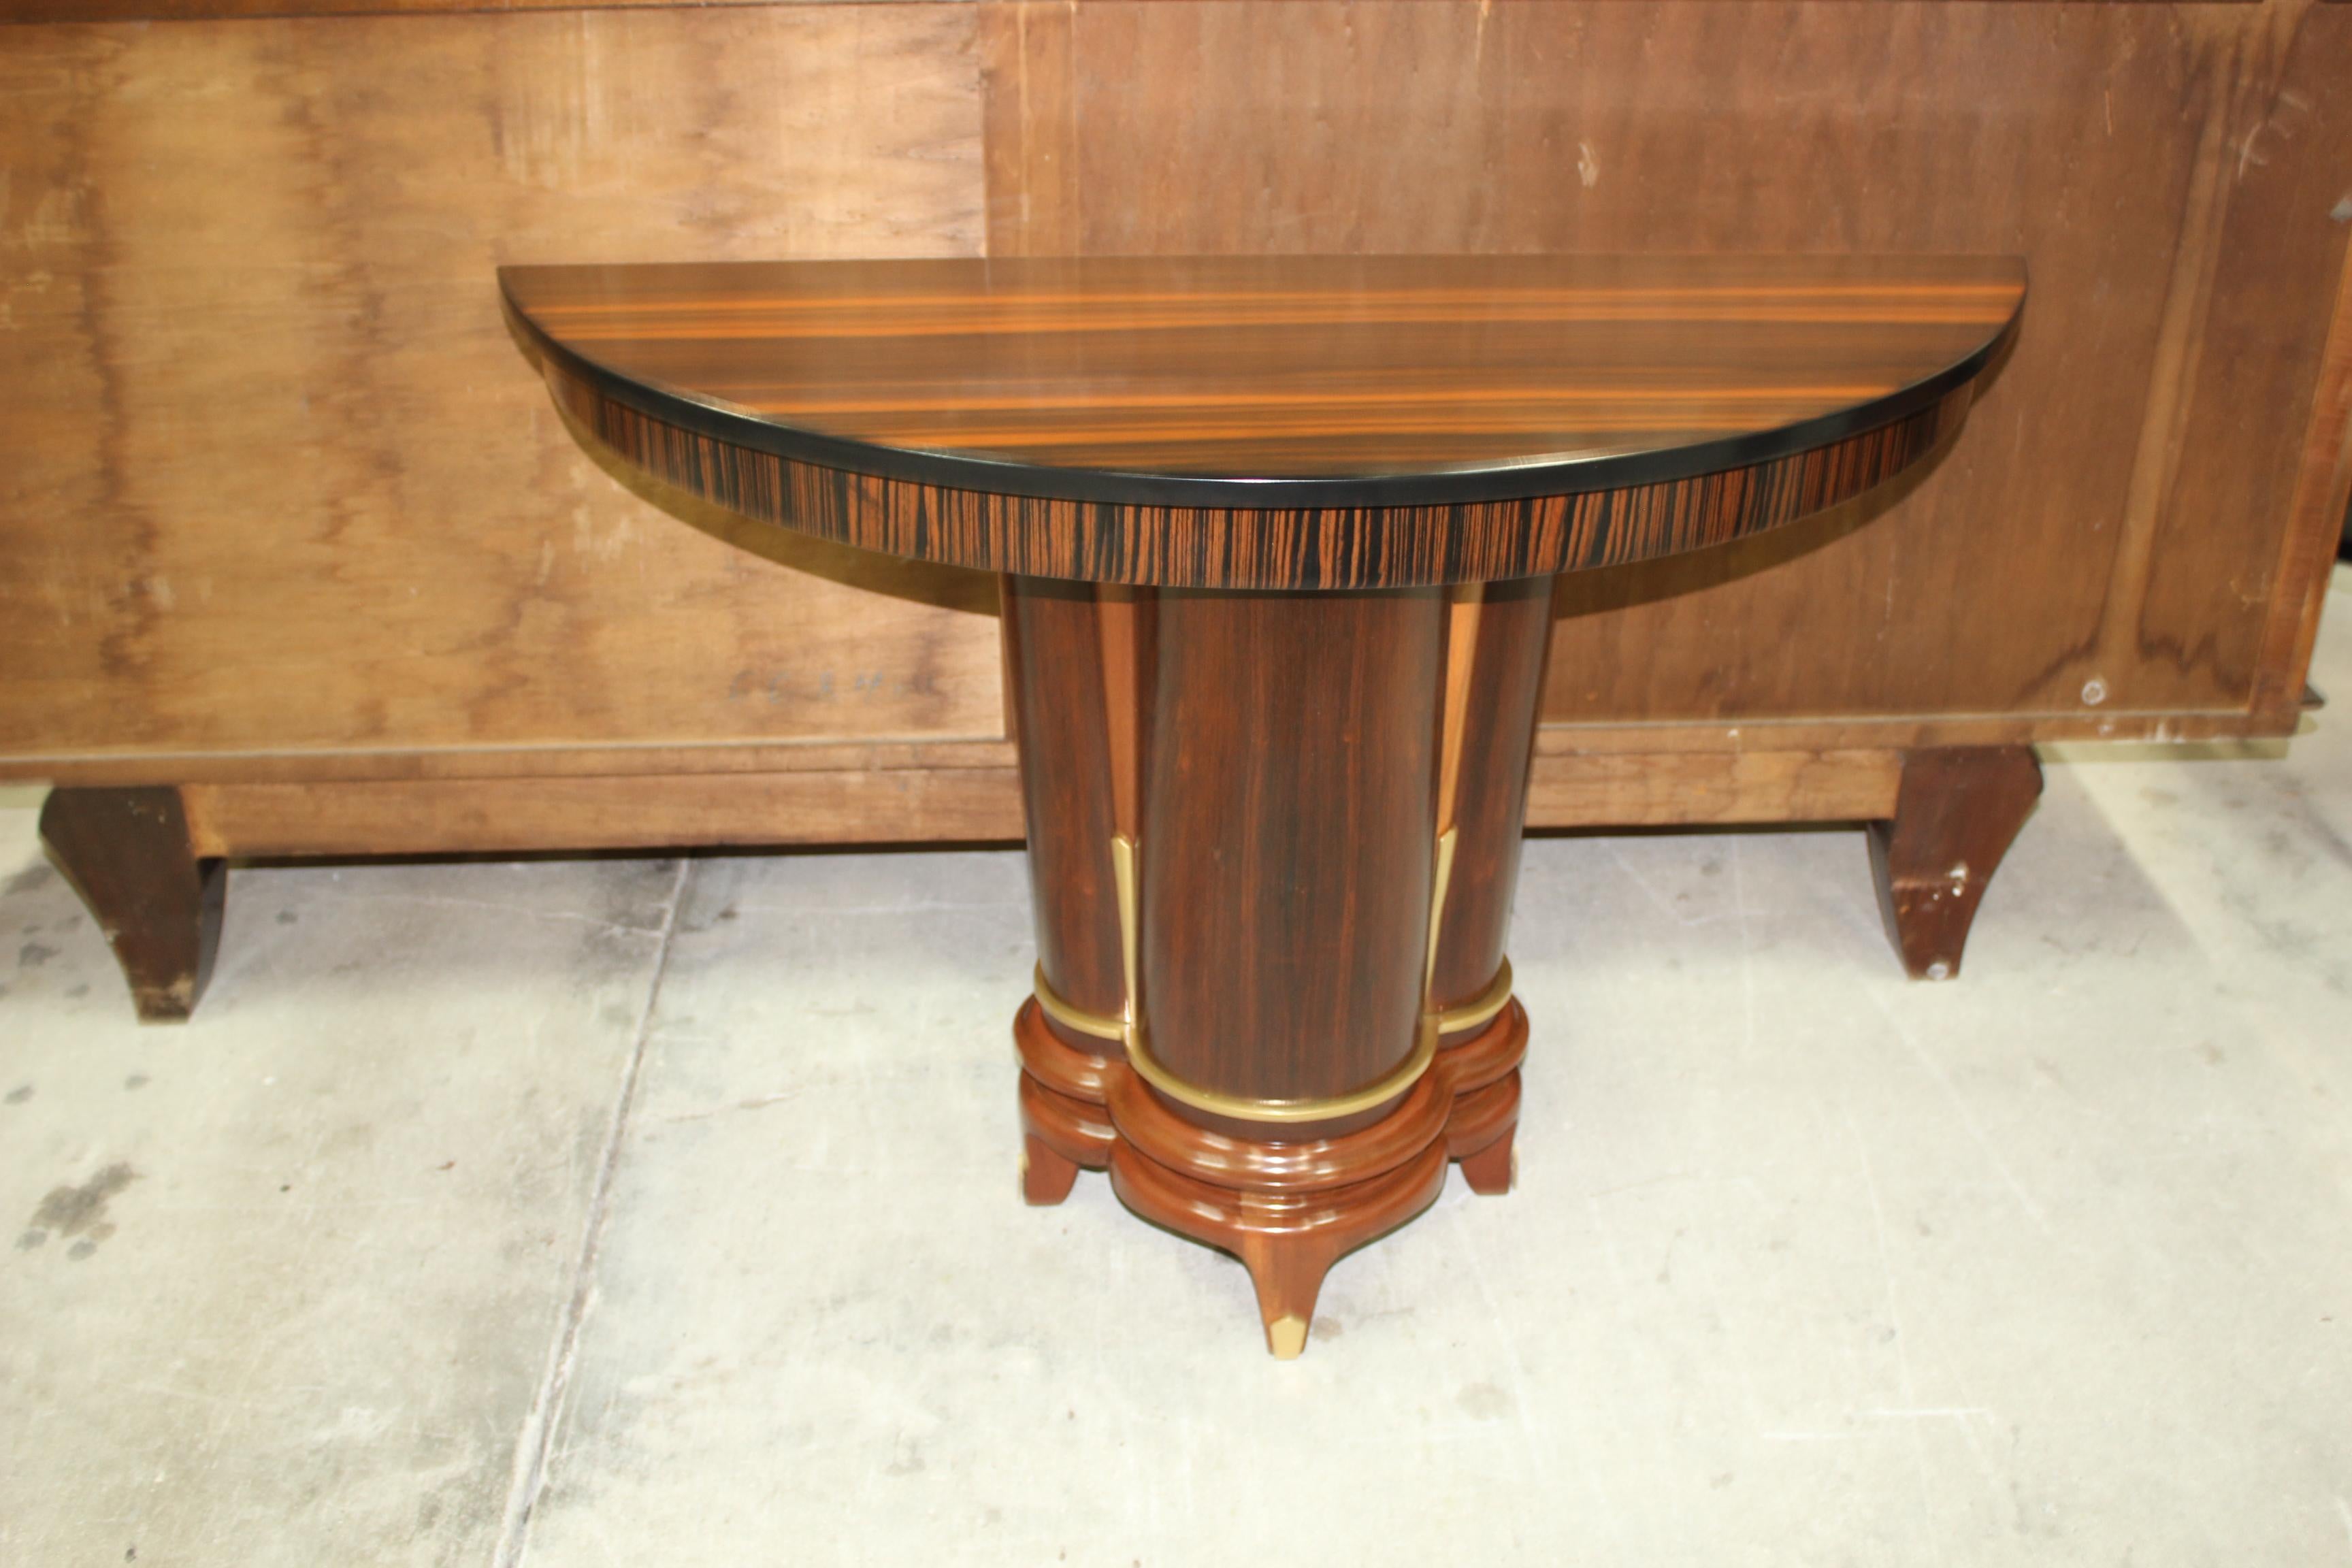 Classic French Art Deco exotic Macassar ebony console tables, circa 1940s. Beautiful Macassar ebony with demilune Macassar top and beautiful design centre base, lacquer finish in both side, beautiful bronze hardware detail, finish in both side,